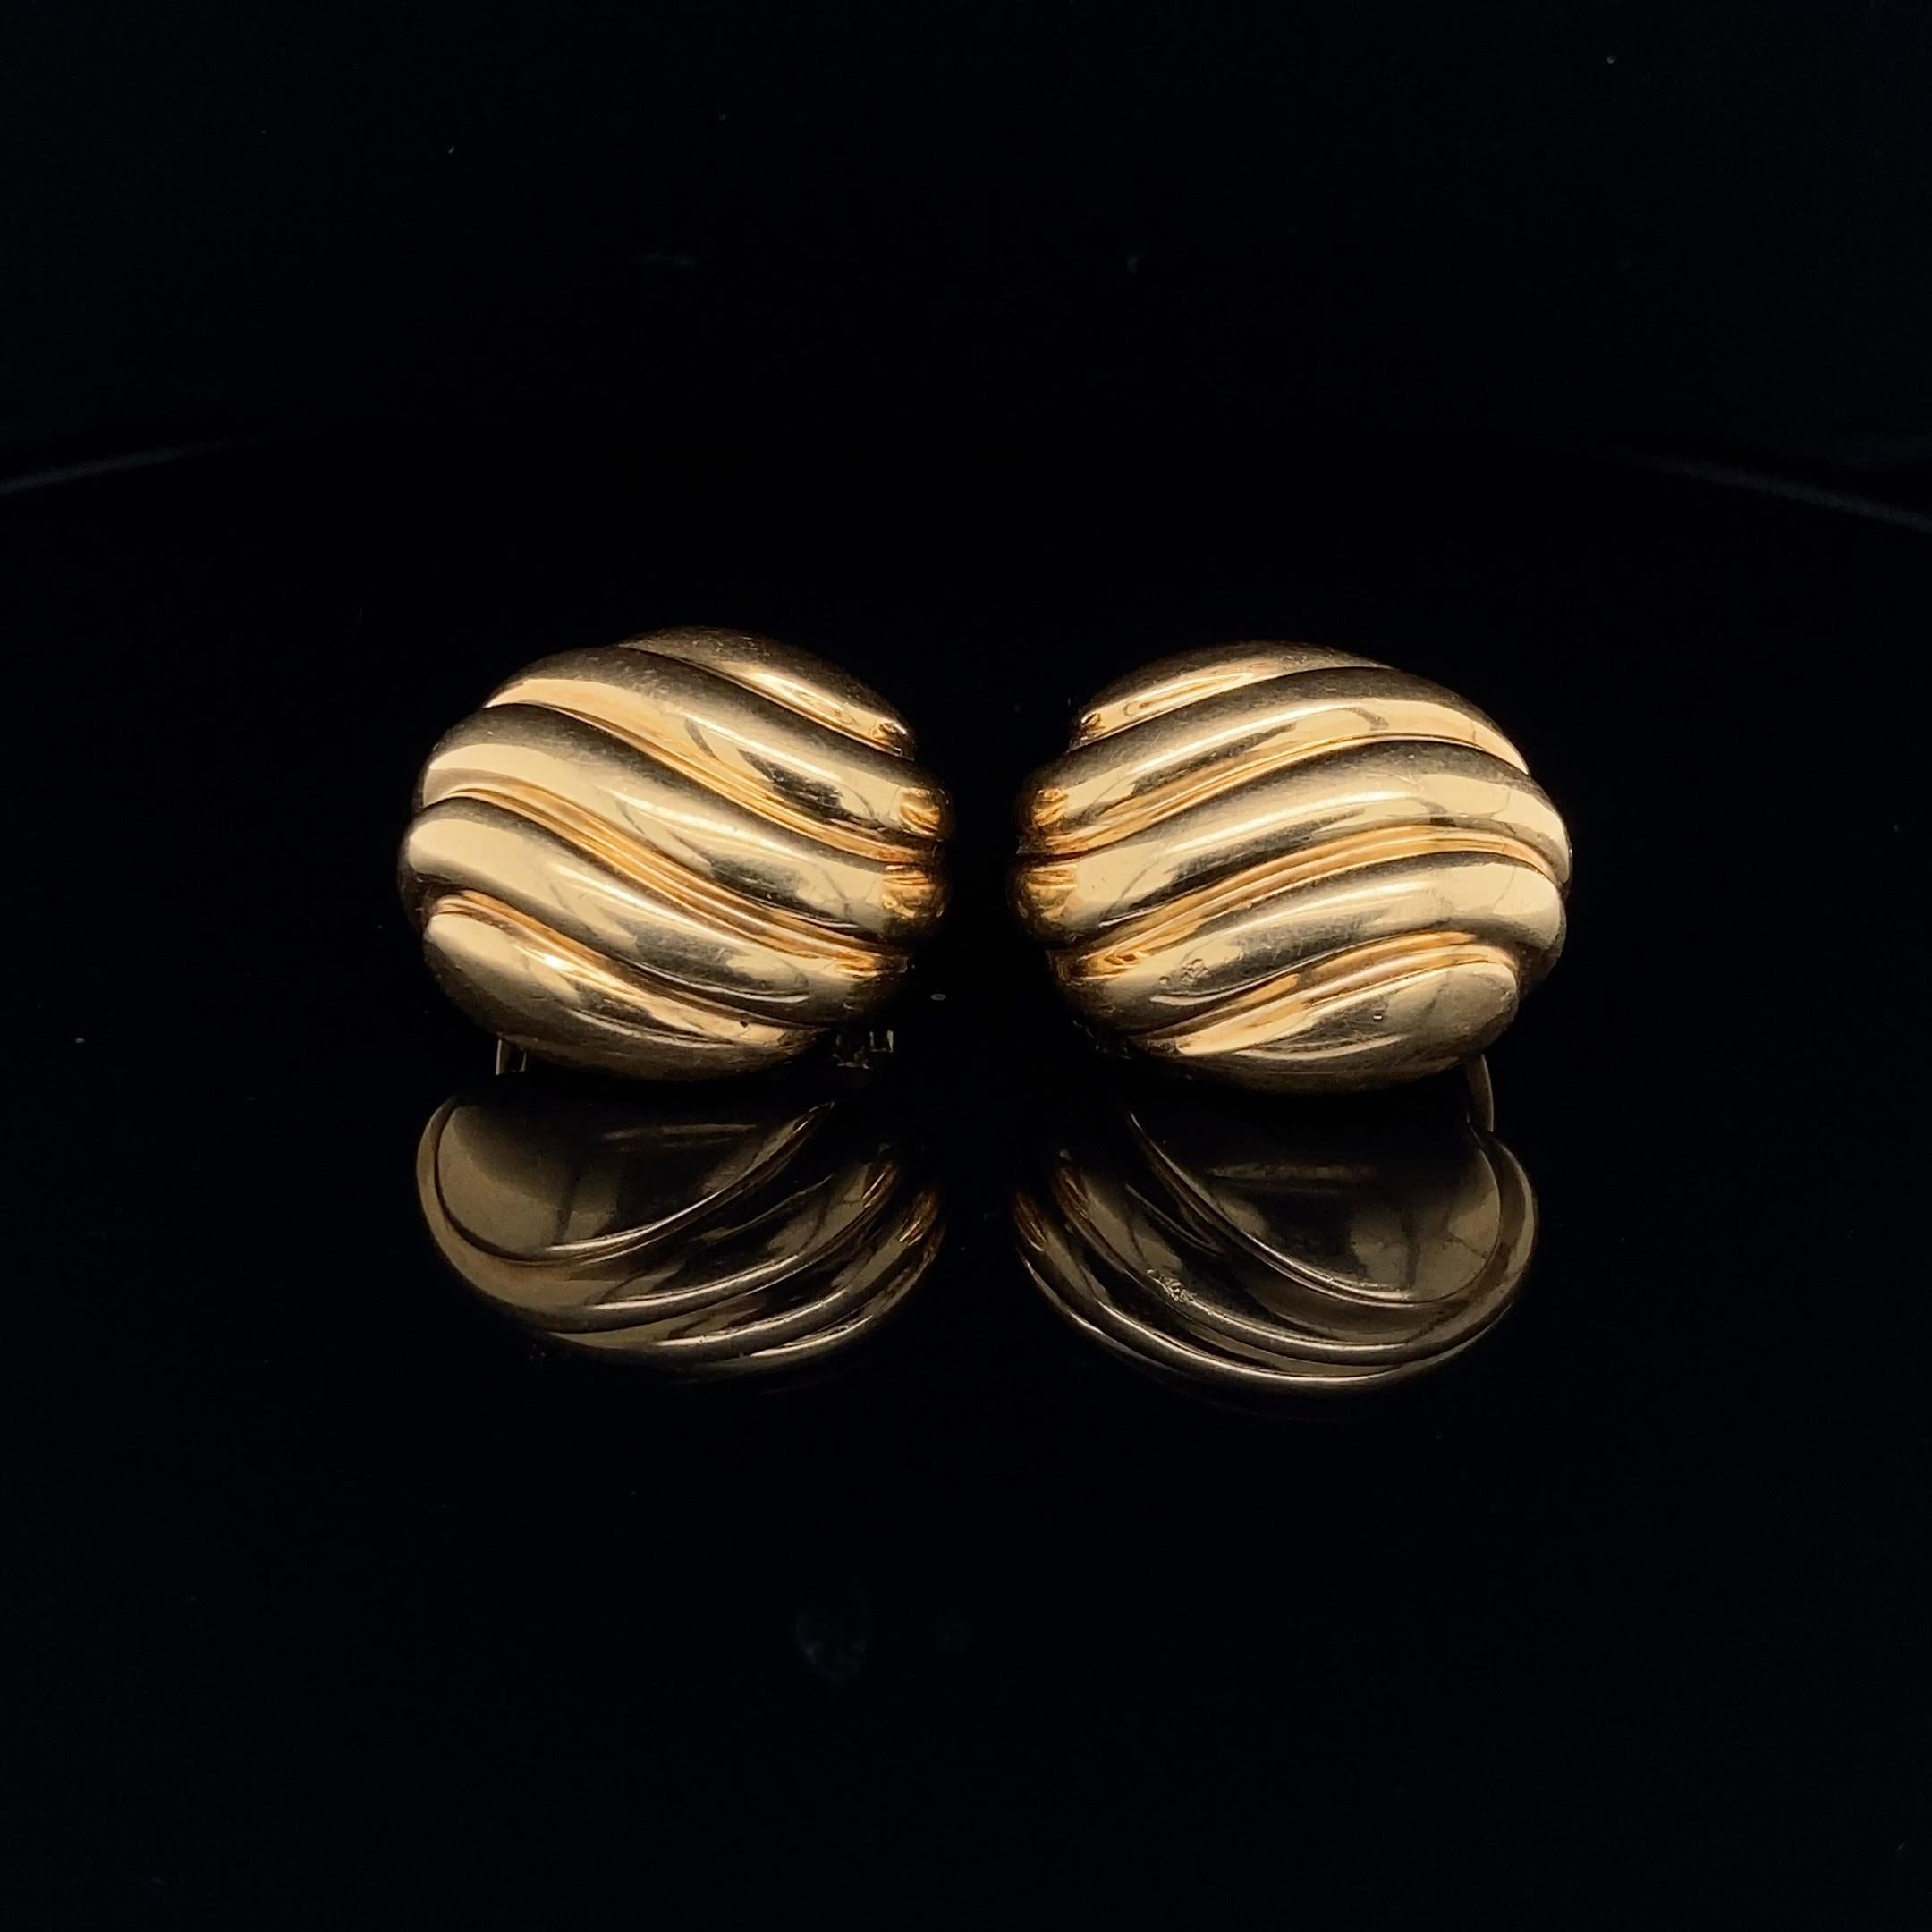 18K yellow gold Cartier oval ear clips with a swirl pattern in relief. 
The clips have a lovely vintage feel to them, are fully signed and numbered Cartier 603680, stamped 750 and with French assay mark.
Length: 2.1cm long
Weight: 19g